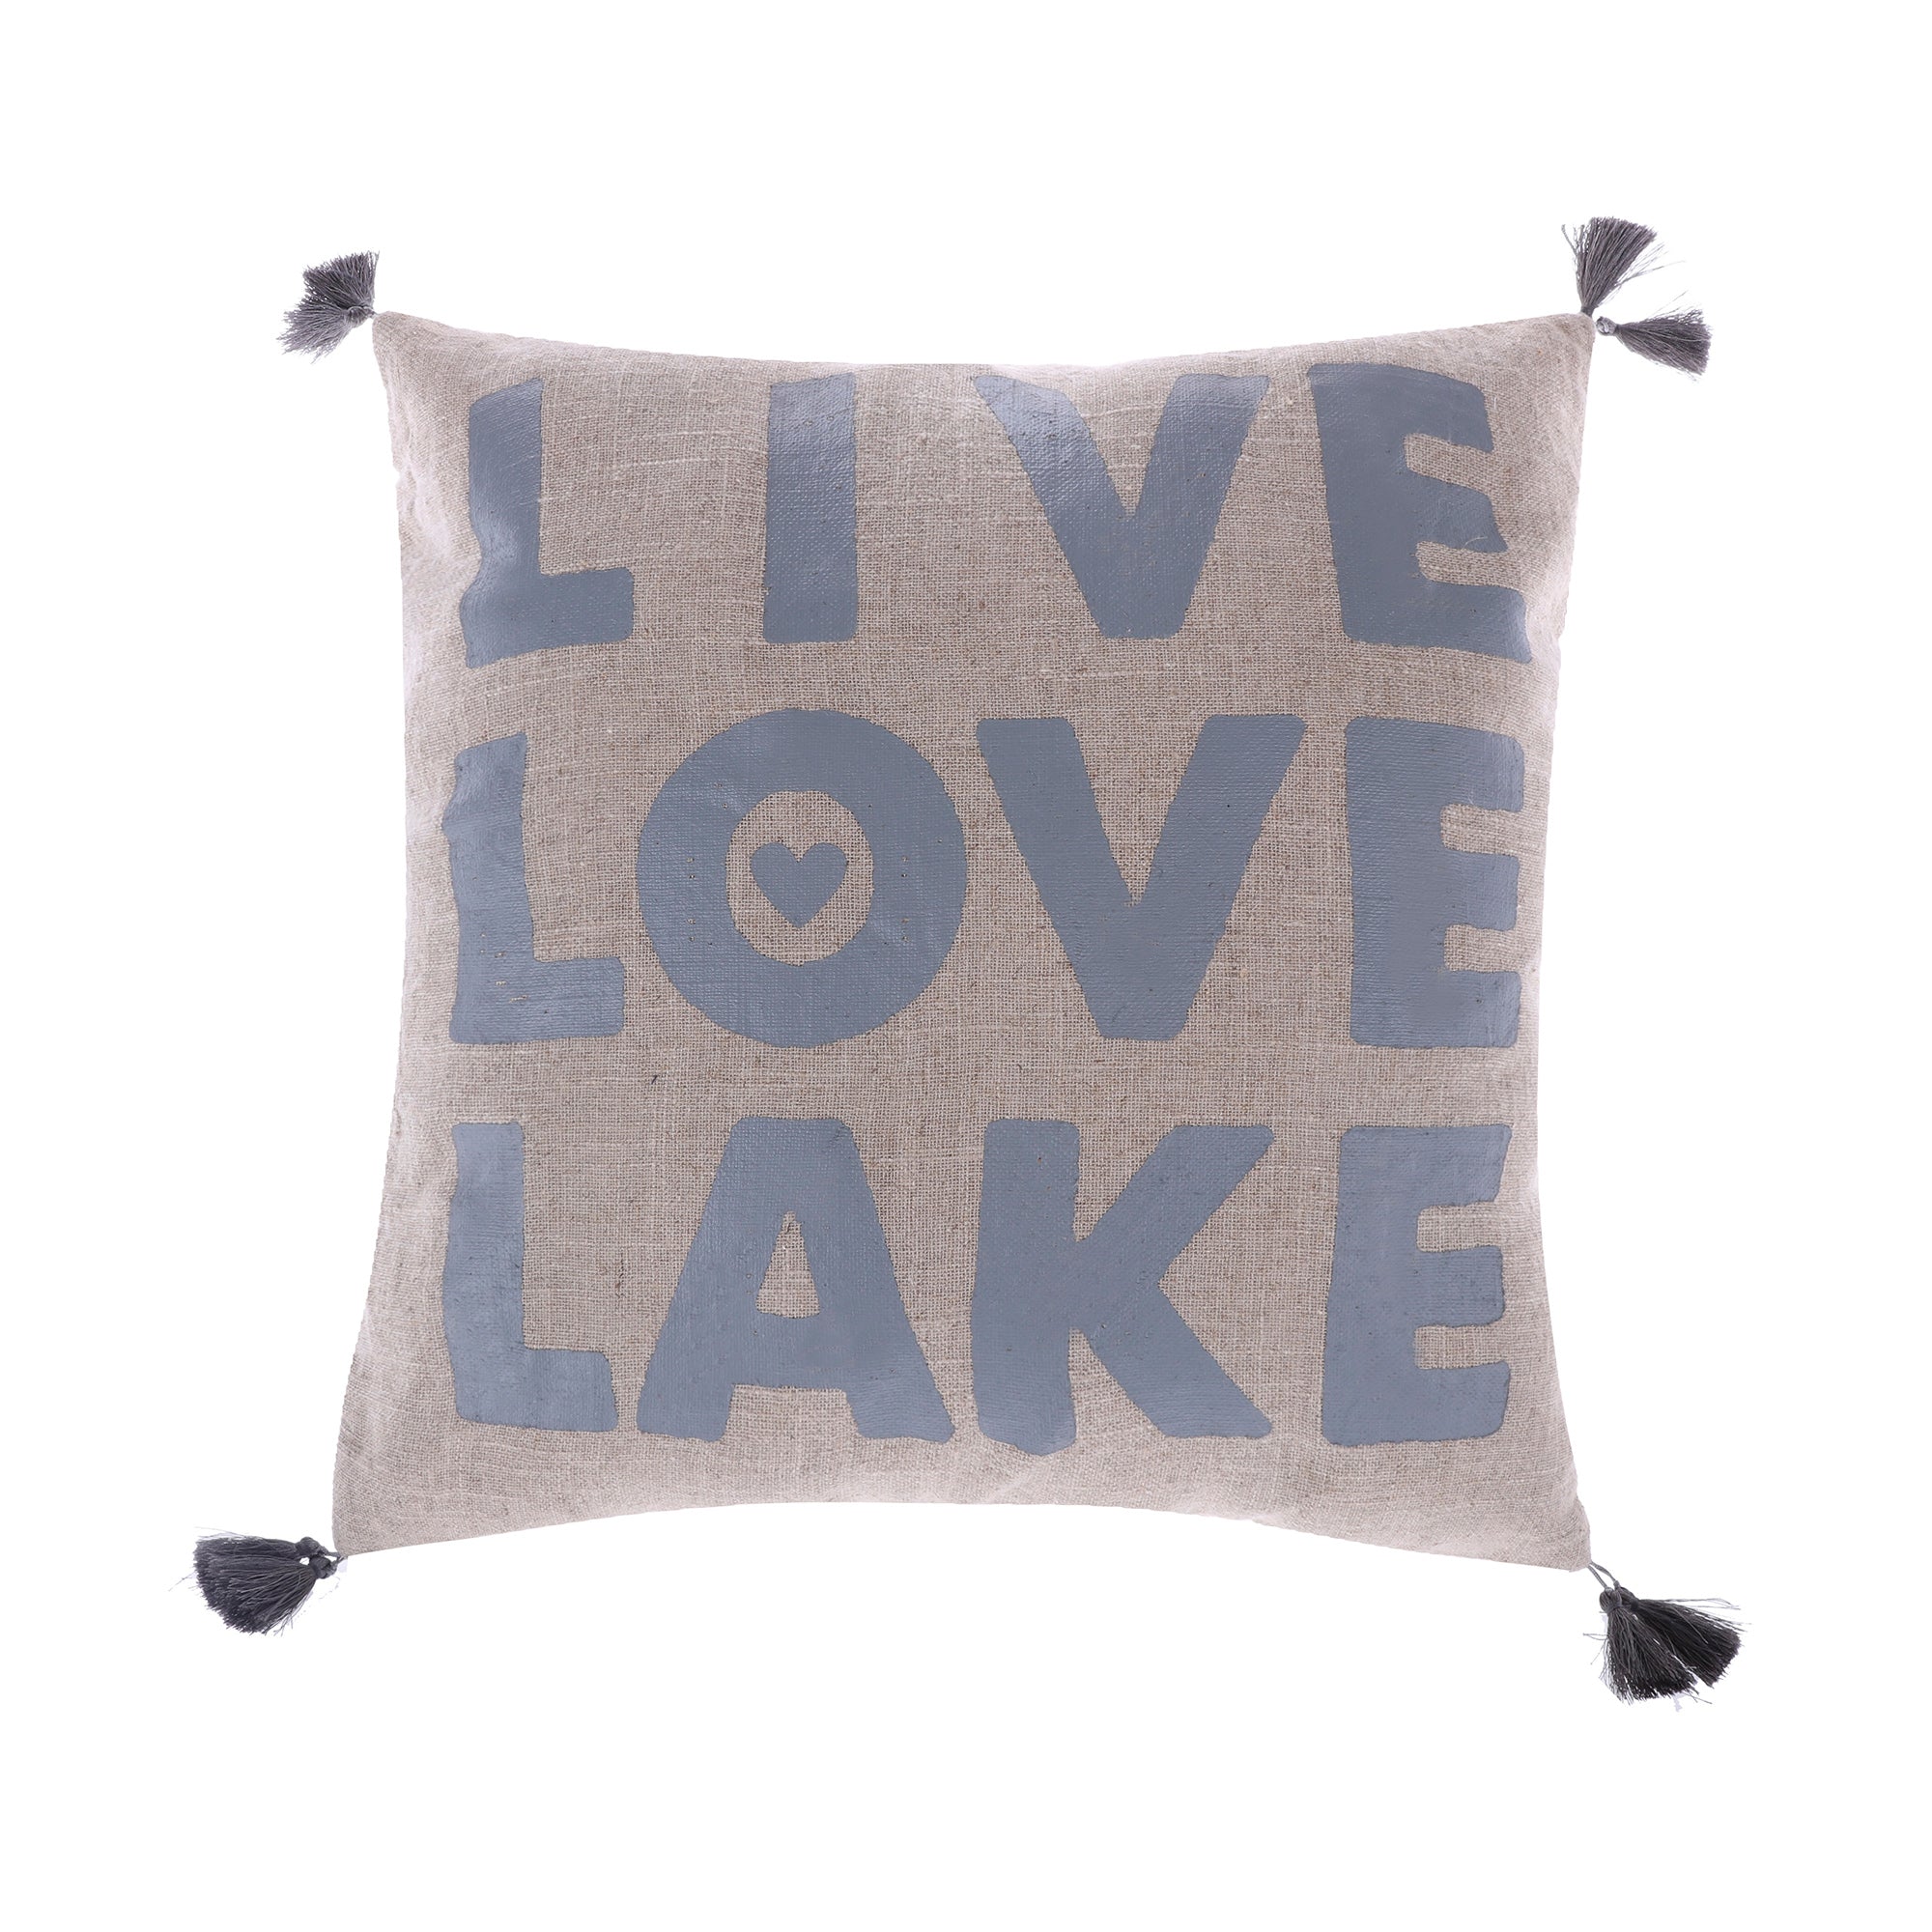 Live Love Lake withTassels Pillow